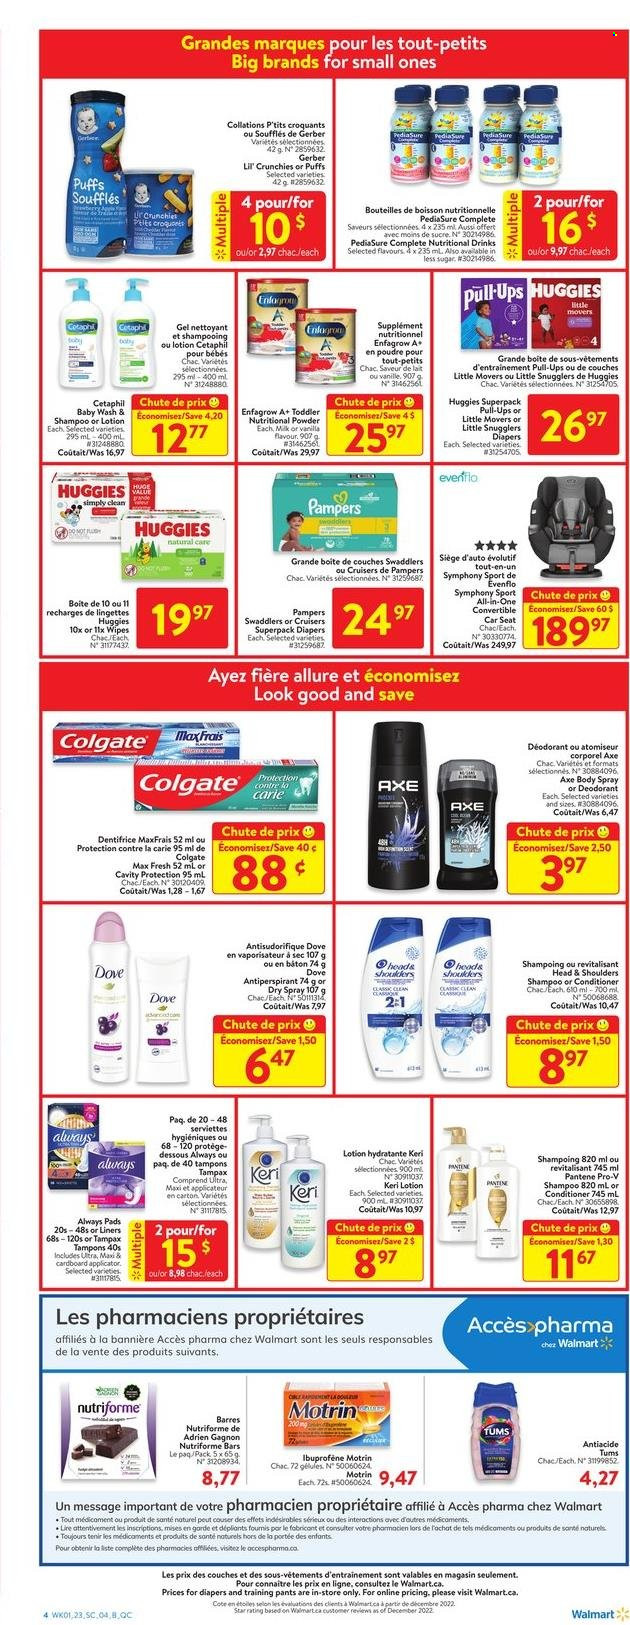 thumbnail - Walmart Flyer - January 26, 2023 - February 01, 2023 - Sales products - puffs, milk, Dove, Gerber, Lil' Crunchies, wipes, Pampers, pants, nappies, baby pants, Keri, Always pads, tampons, conditioner, Head & Shoulders, Pantene, body lotion, body spray, anti-perspirant, Axe, baby car seat, Motrin, Colgate, shampoo, Tampax, Huggies, deodorant. Page 6.